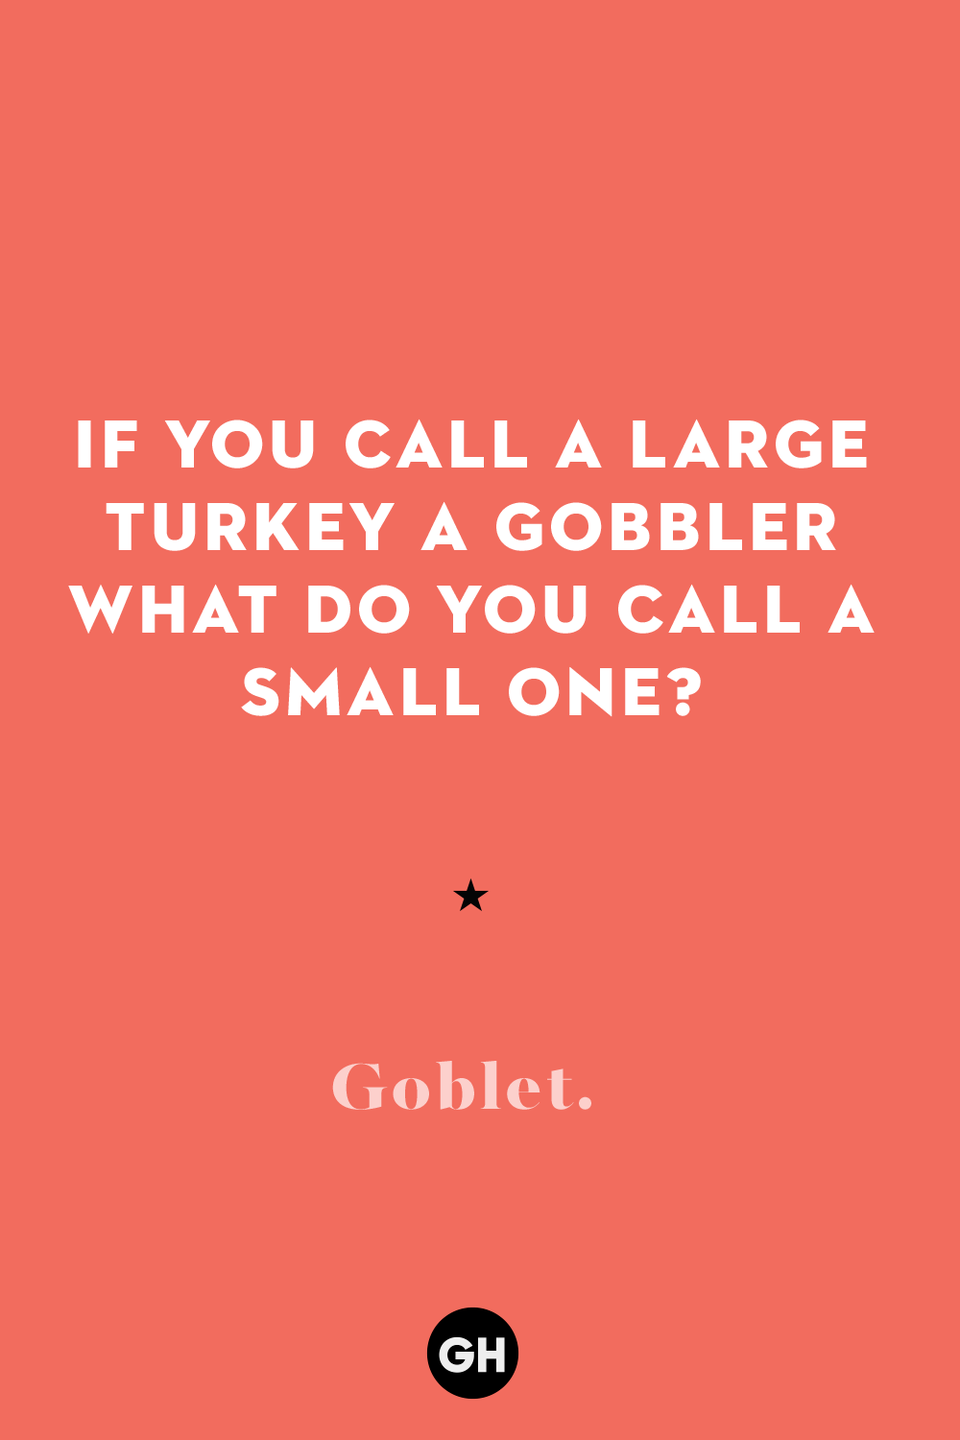 50) If you call a large turkey a gobbler what do you call a small one?